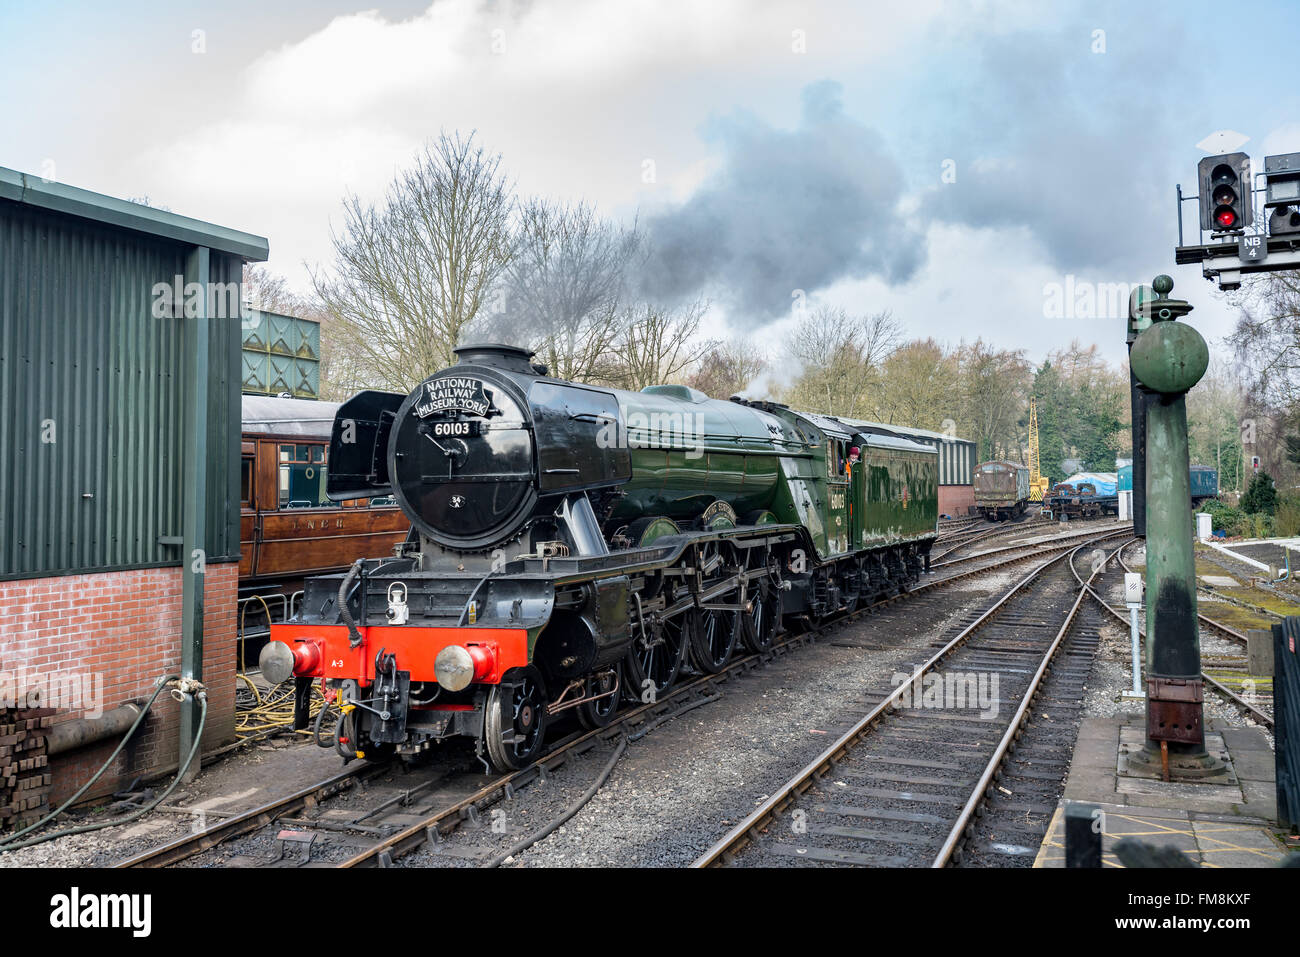 Pickering, North Yorkshire, 11th. March 2016. Hundreds of people turn out to greet the Flying Scotsman steam locomotive as it arrives in Pickering station. The North York Moors railway is the first heritage railway to have the famous loco after its 10 year £4.2-million-pound restoration. Stock Photo